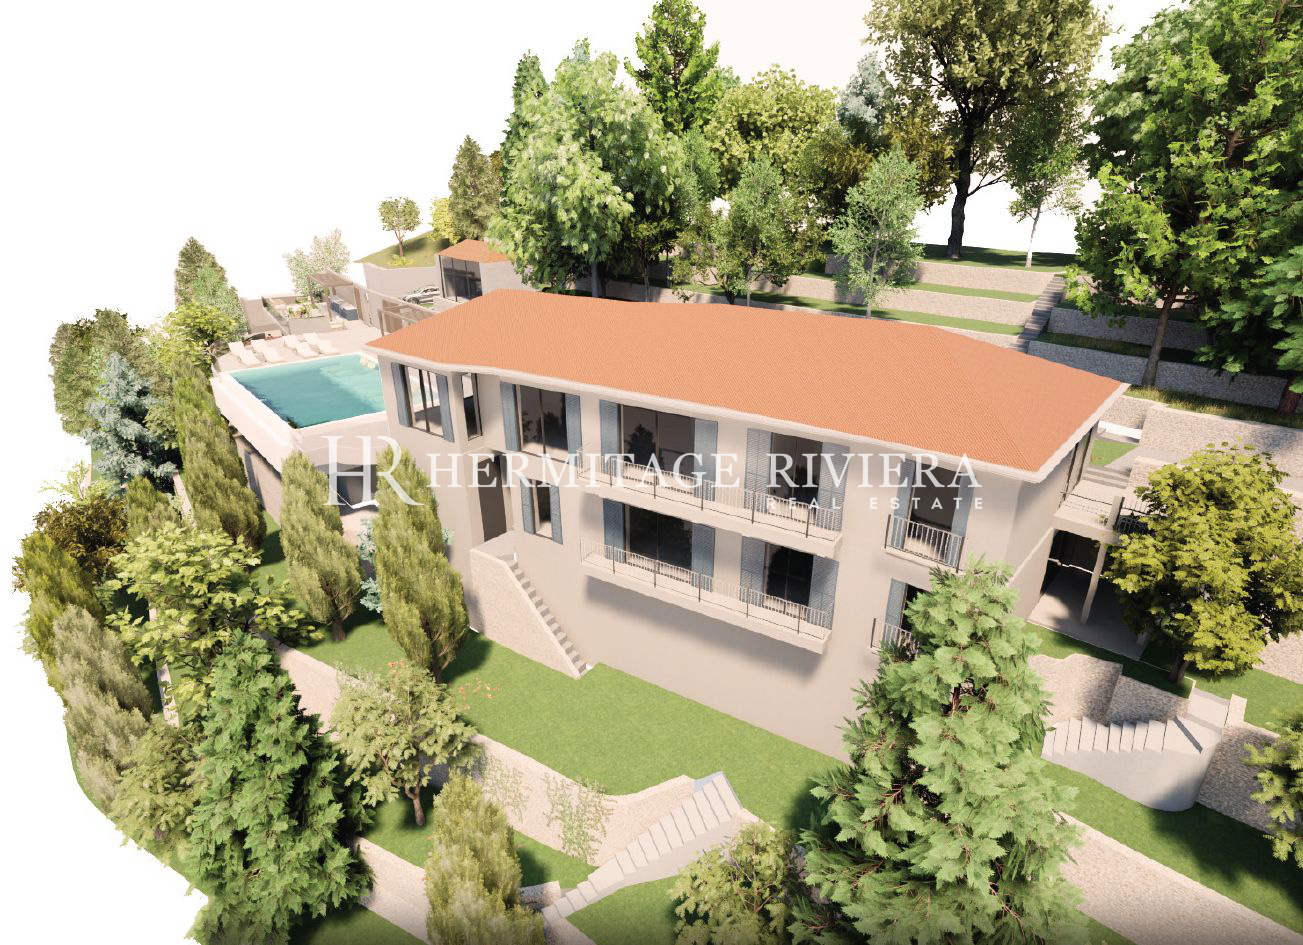 Property close Monaco with panoramic view  (image 5)